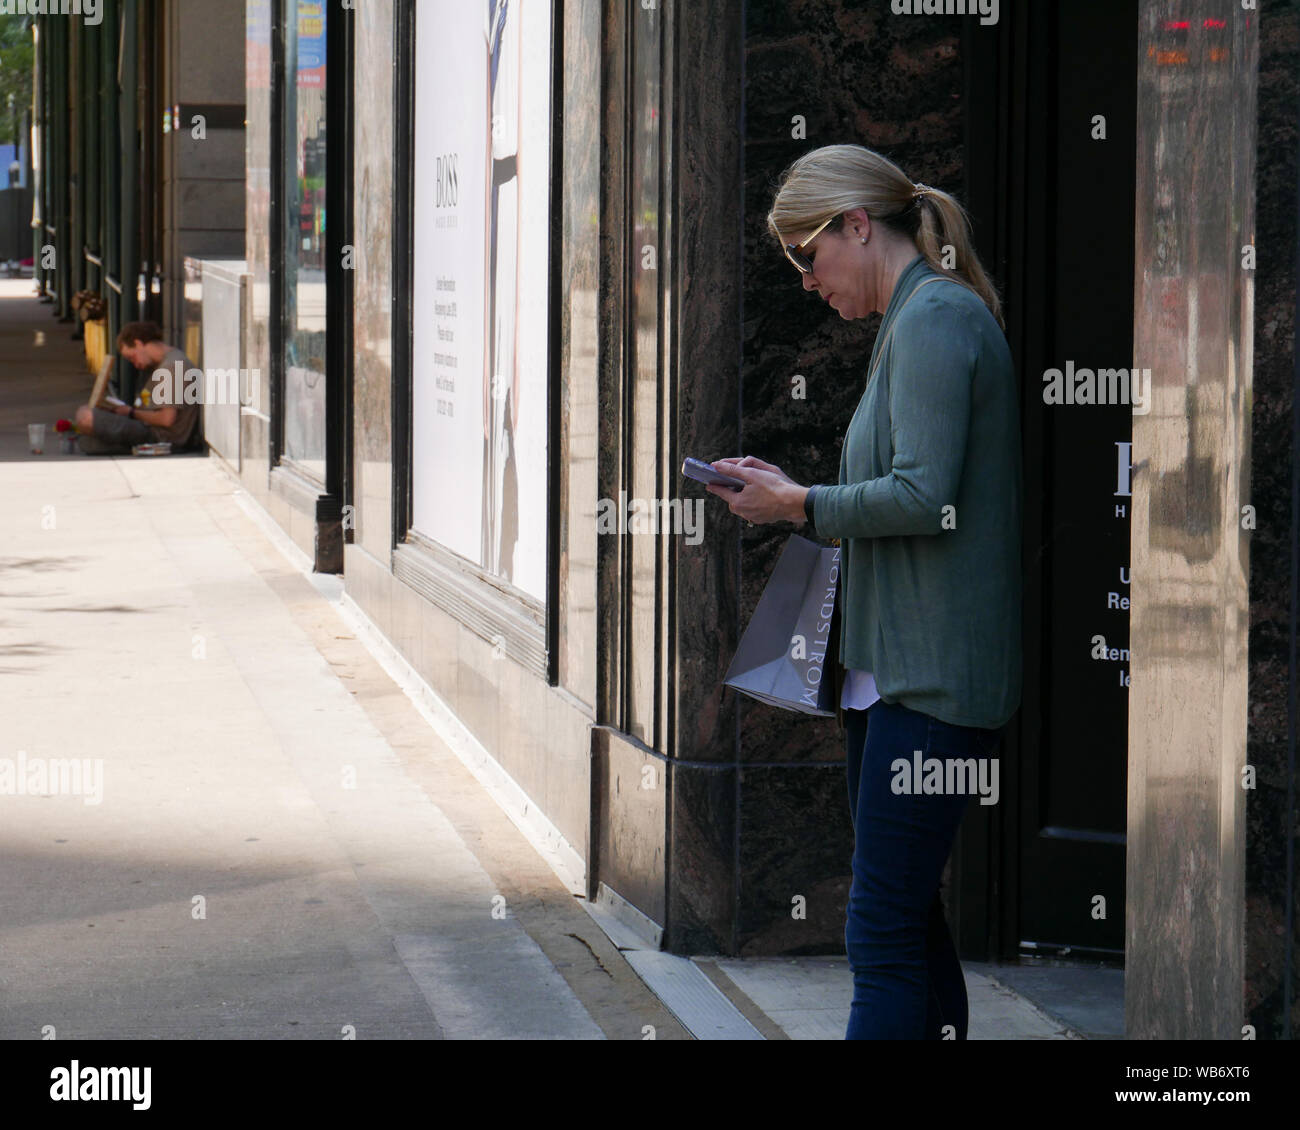 Woman with Nordstrom's bag checking phone. Homeless man in background. Chicago, Illinois. Stock Photo